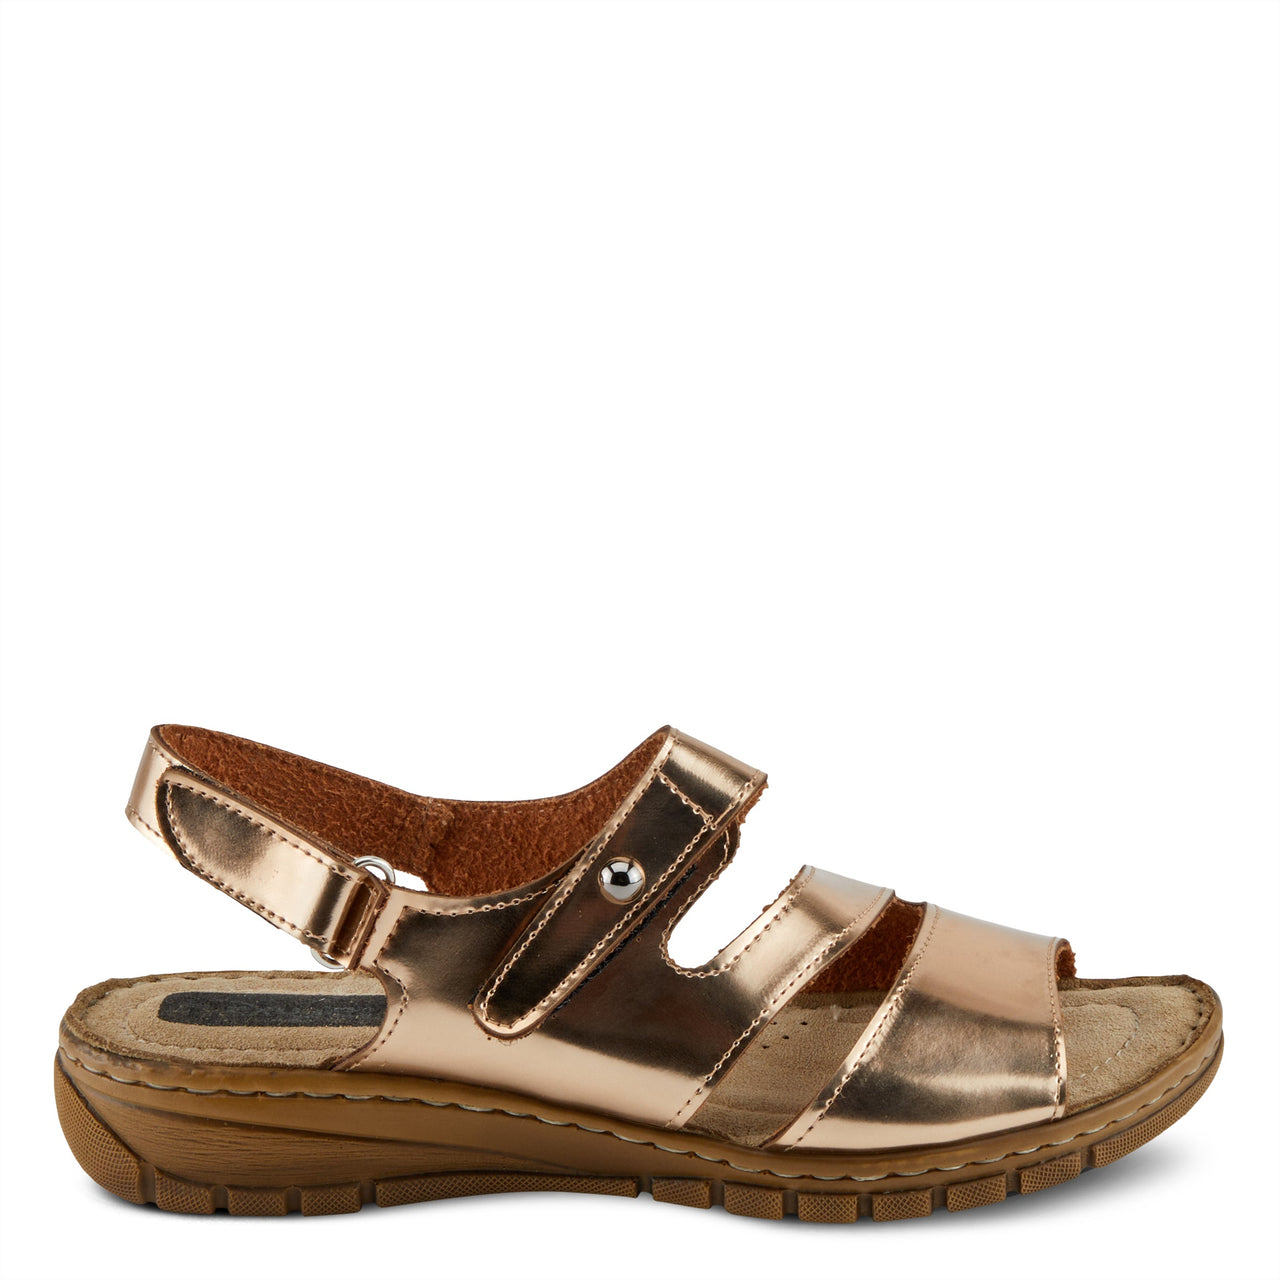 Spring Step Shoes Flexus Maera L070 Sandal - Women's comfortable and stylish sandal perfect for every day wear and outdoor activities